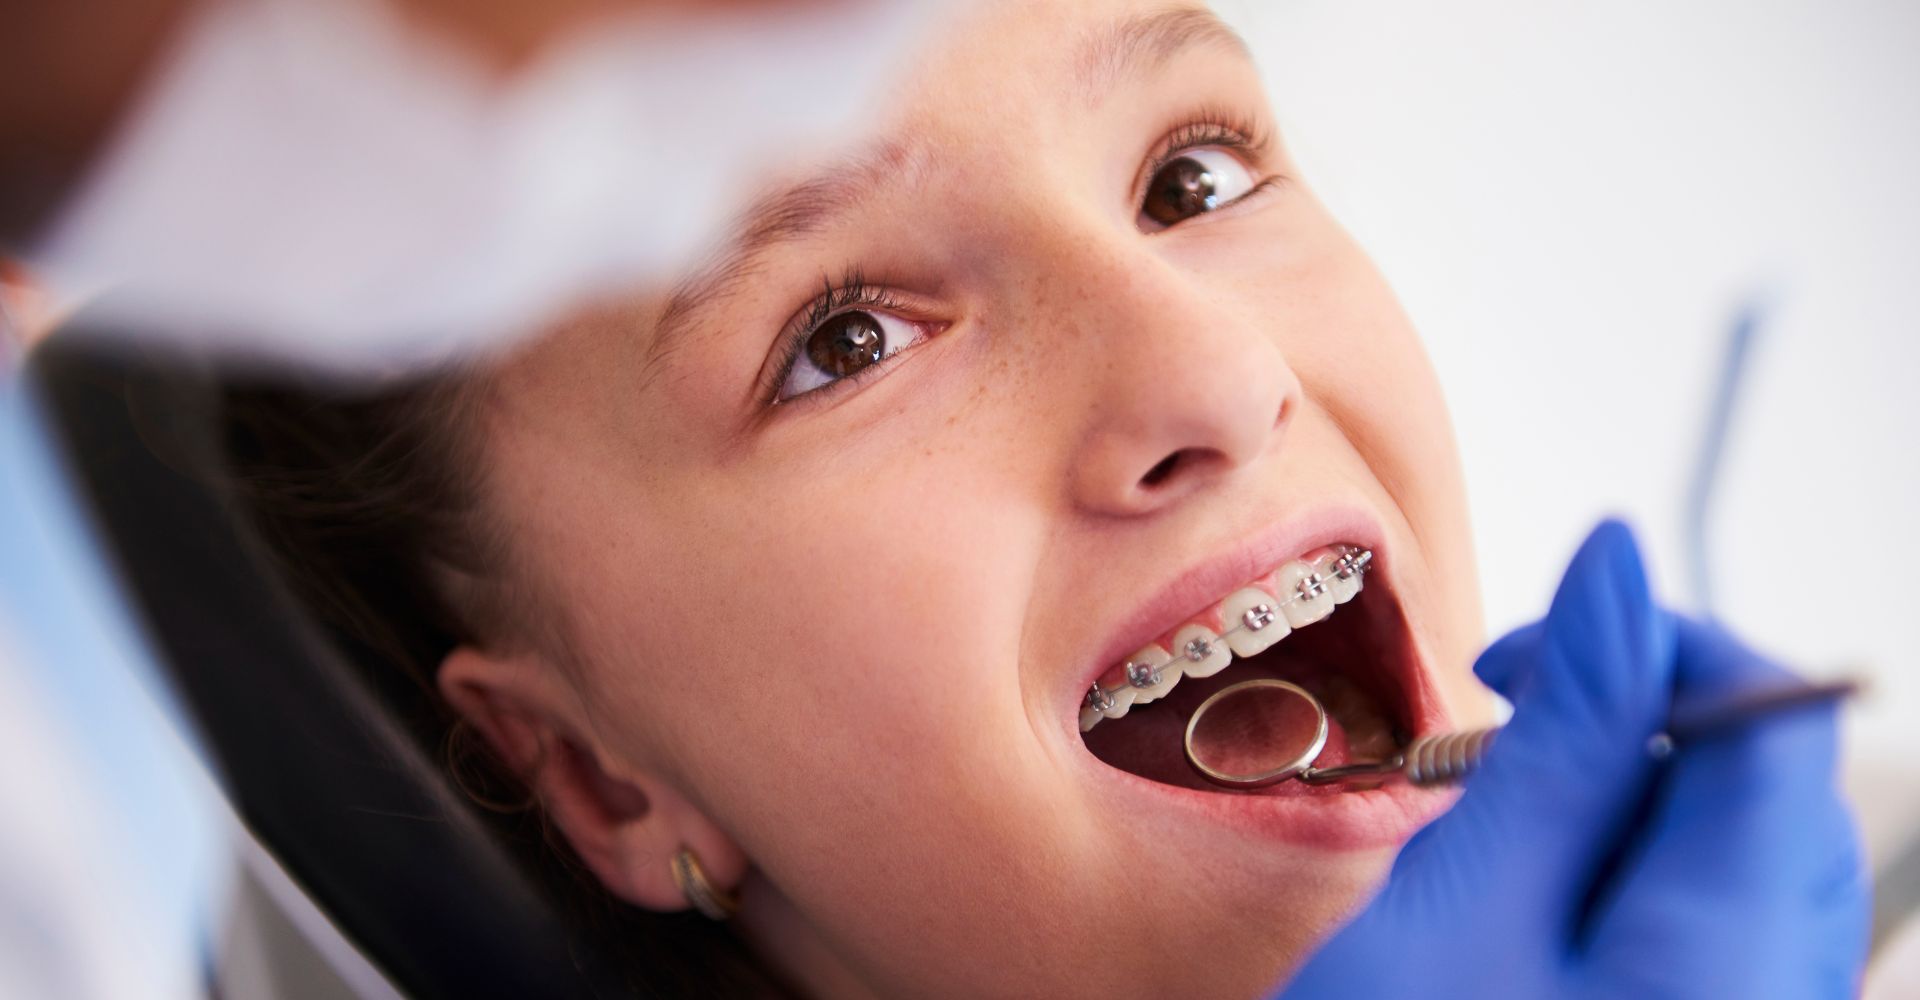 4 Benefits of Getting Braces as a Kid